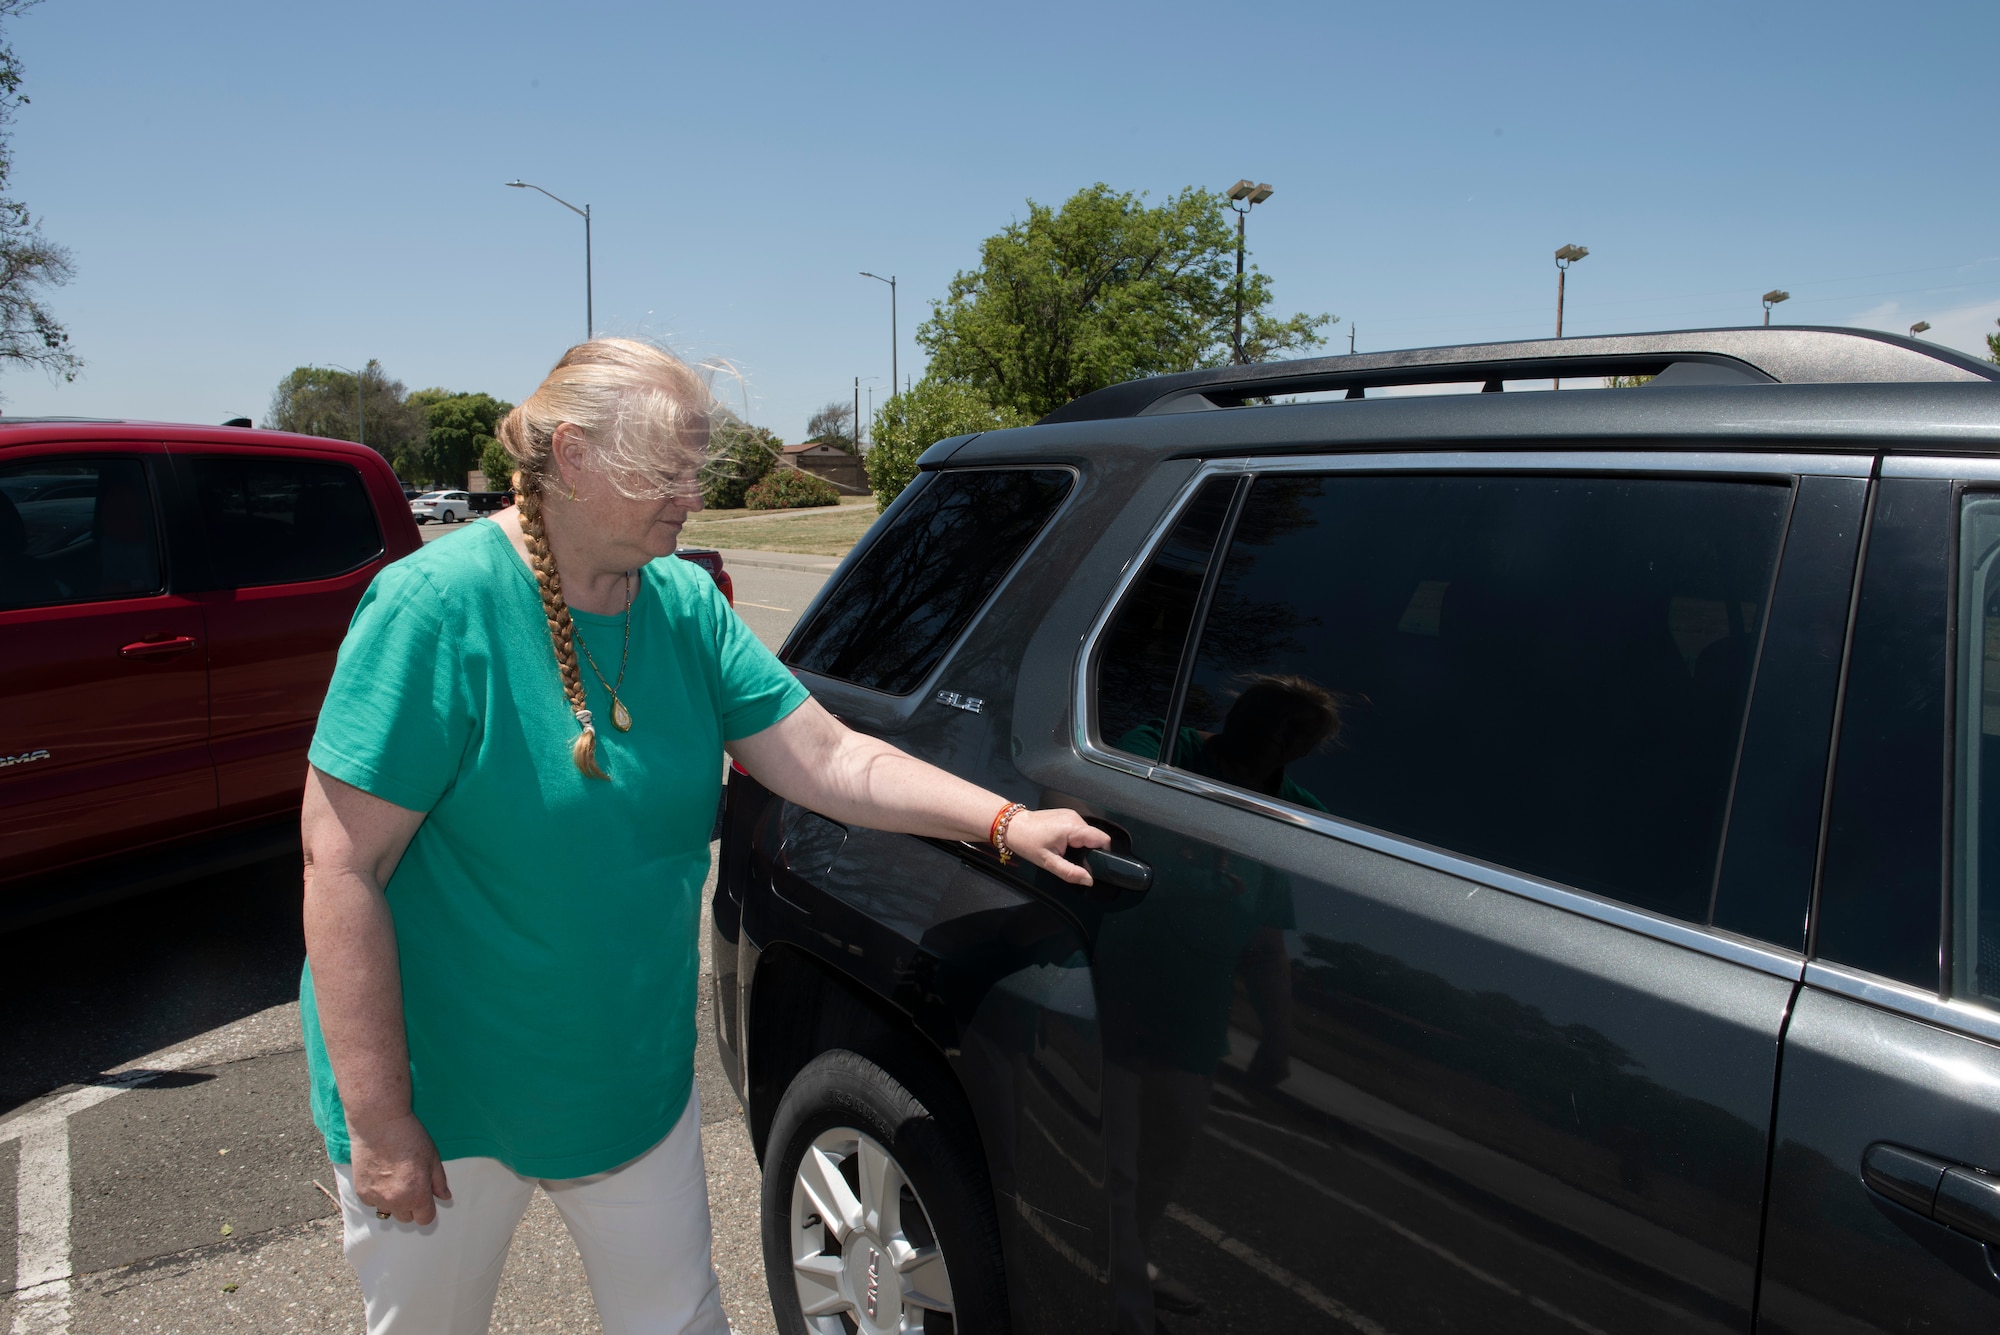 Heide Couch, 60th Air Mobility Wing photographer, prepares to enter a vehicle May 30, 2019 at Travis Air Force Base, California. Before entering a vehicle driven by a ride-share driver, passengers should confirm the driver’s identity and ensure they are entering the correct vehicle. (U.S. Air Force photo by Tech. Sgt. James Hodgman)